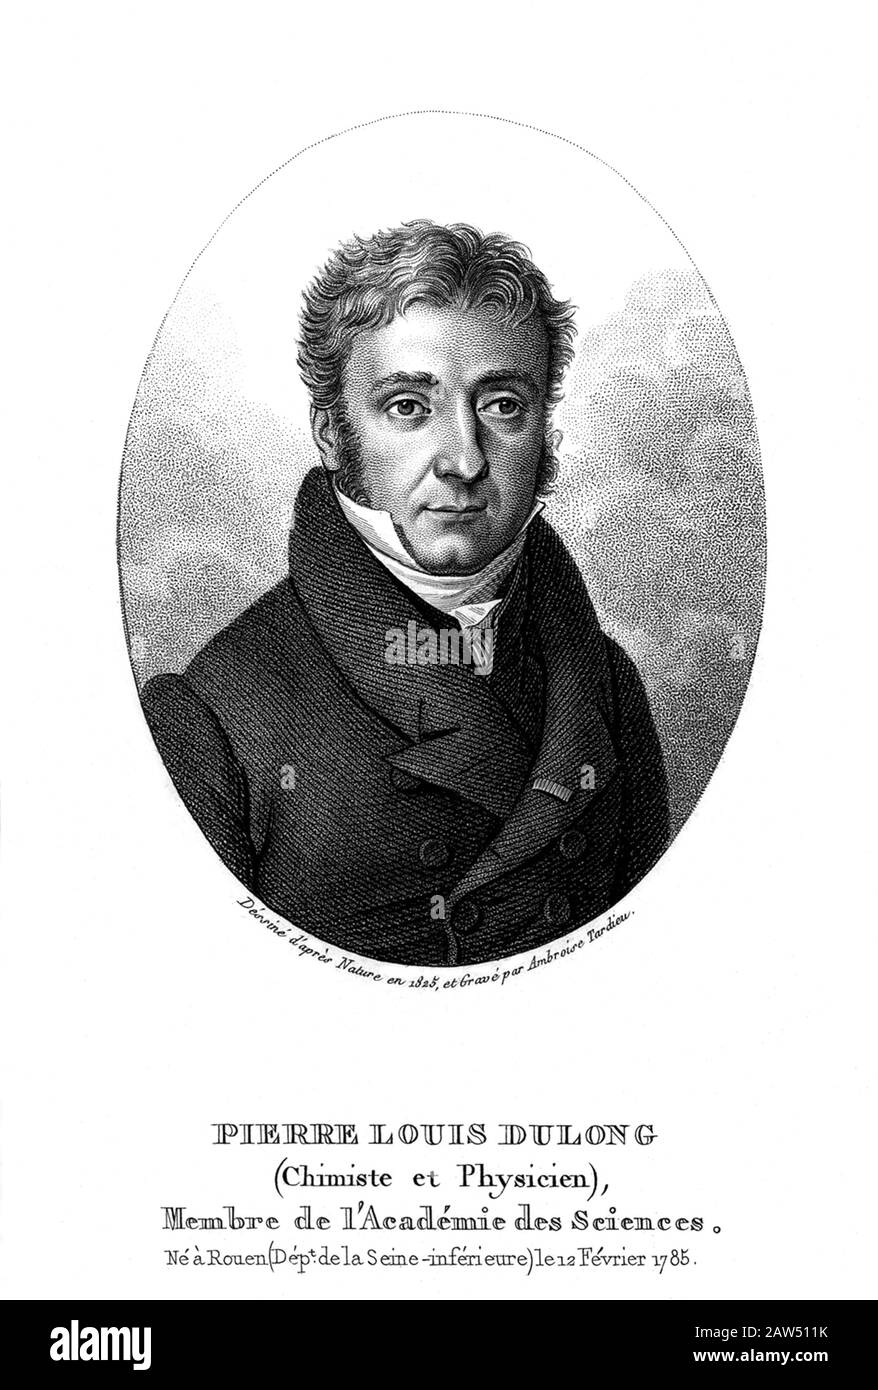 1826 , FRANCE : The french physicist and chemist PIERRE LOUIS DULONG ( 1785 - 1838 ) . Portrait engraving by Ambroise Tardieu , 1826 .He is remembered Stock Photo